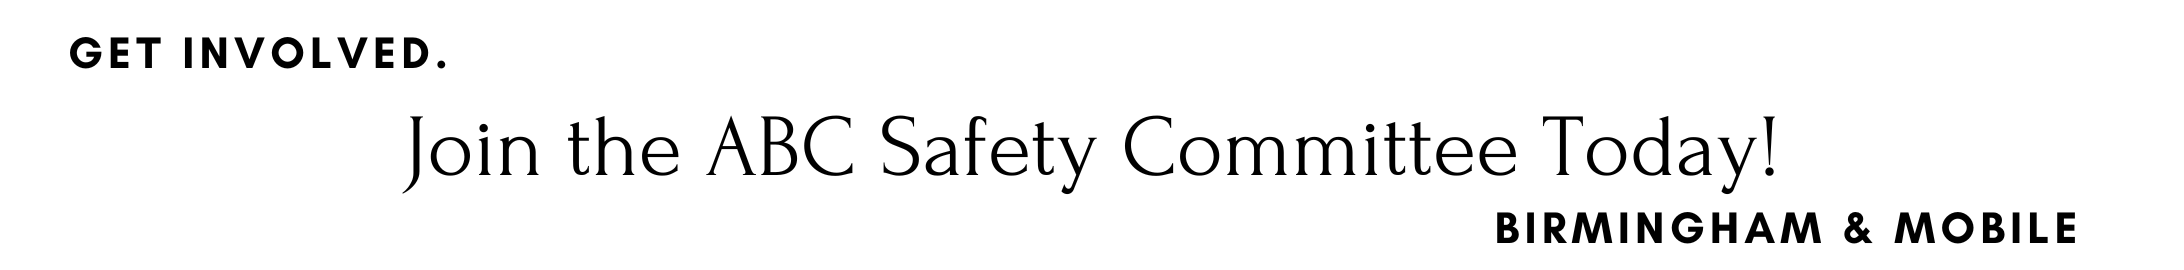 join safety